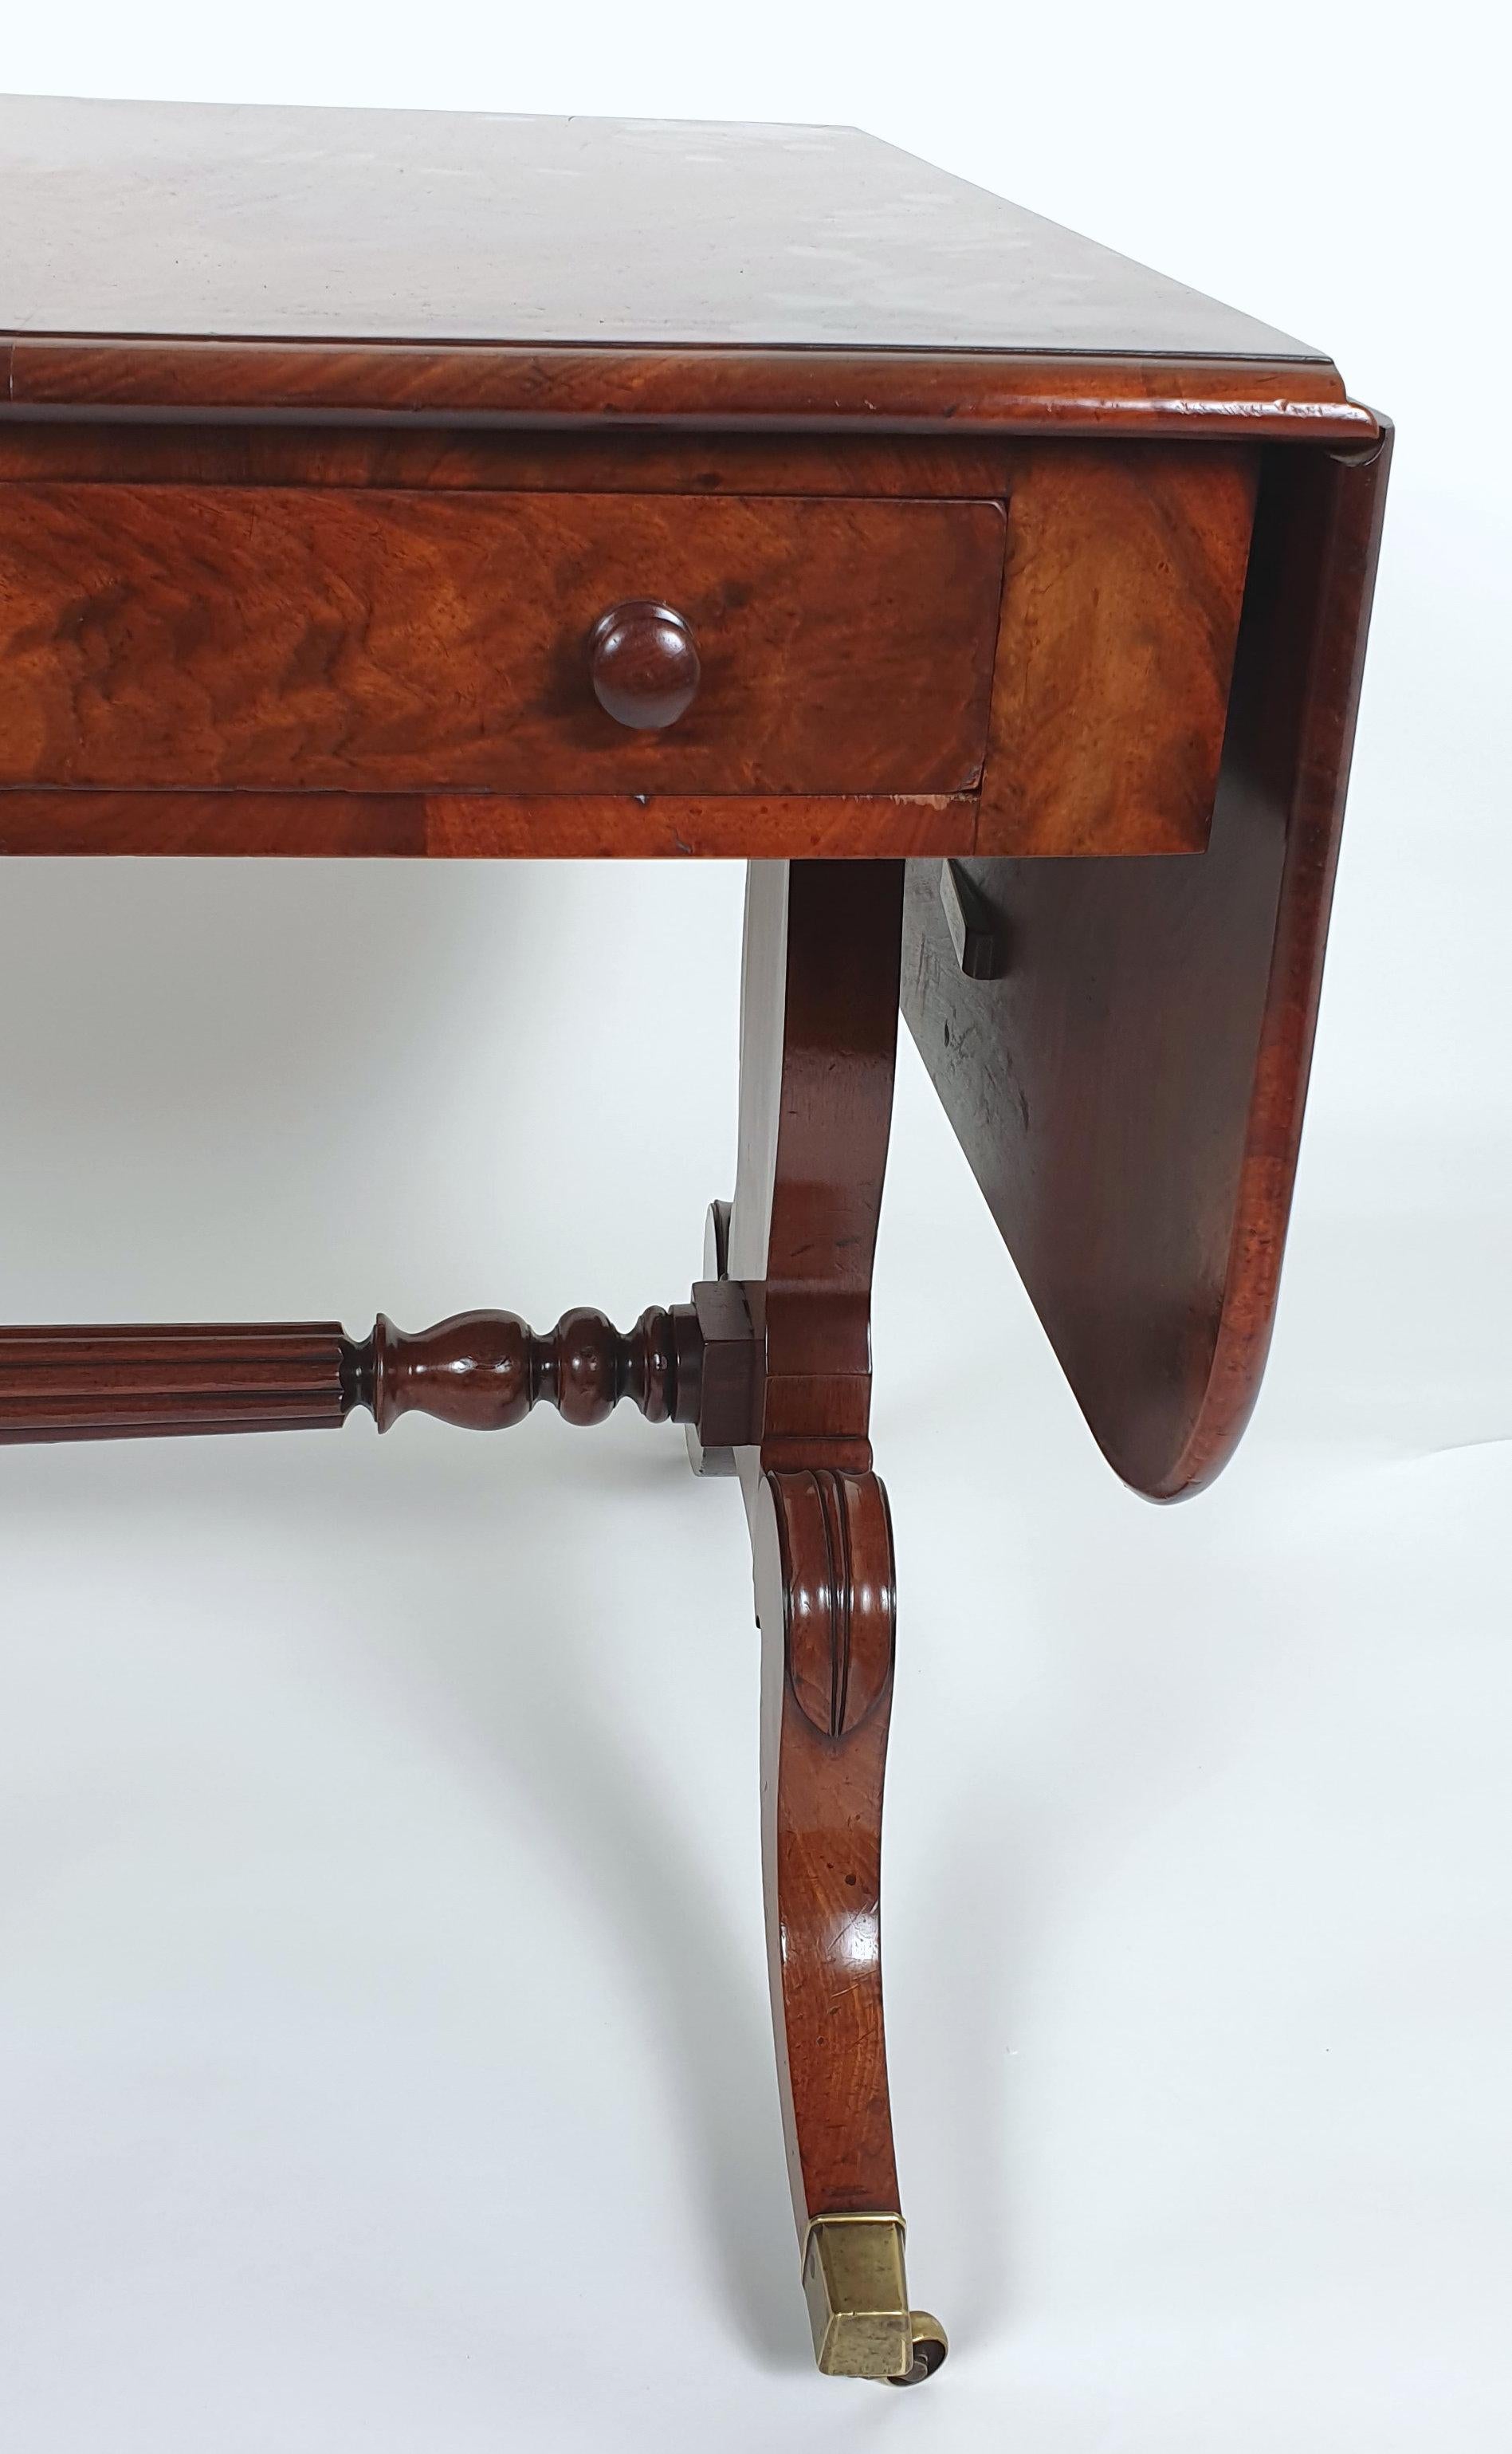 Regency Figured Solid Mahogany Sofa Table In Good Condition For Sale In London, west Sussex